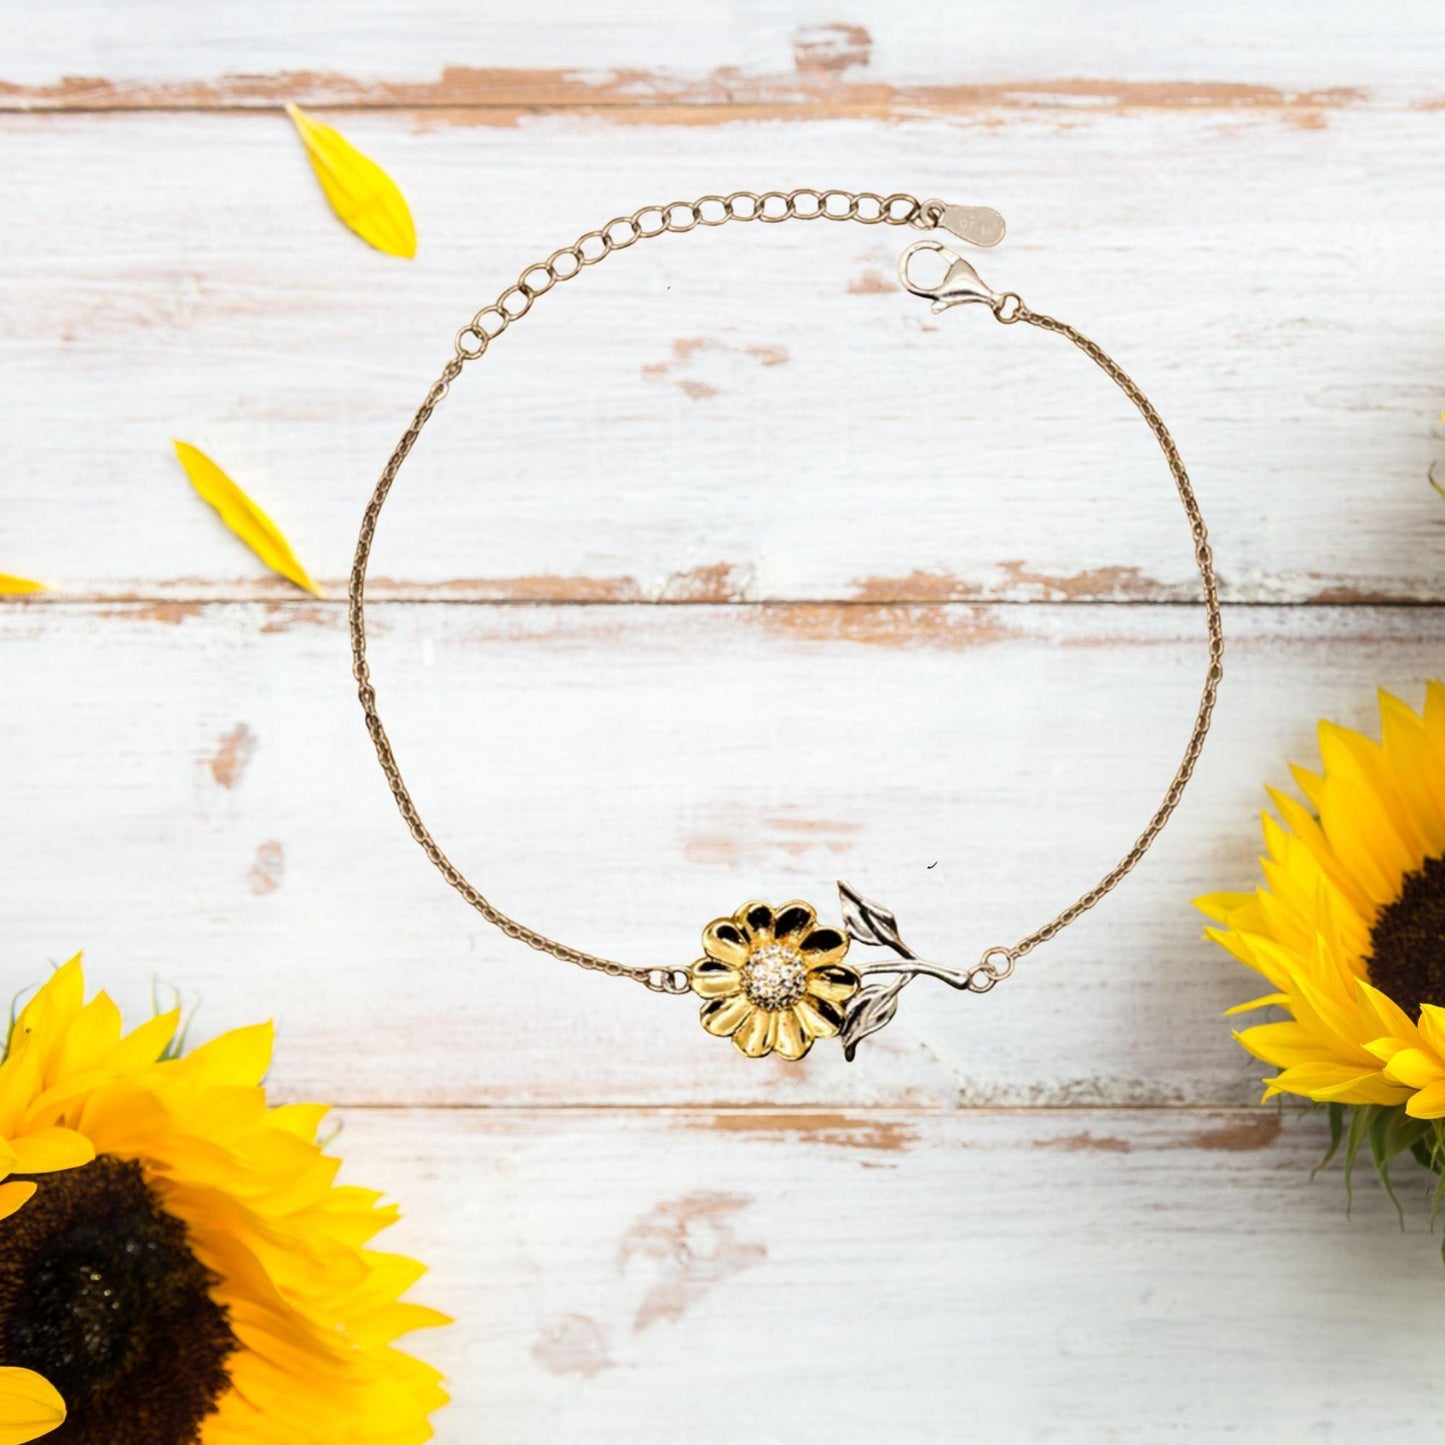 Remarkable Paralegal Gifts, Your dedication and hard work, Inspirational Birthday Christmas Unique Sunflower Bracelet For Paralegal, Coworkers, Men, Women, Friends - Mallard Moon Gift Shop